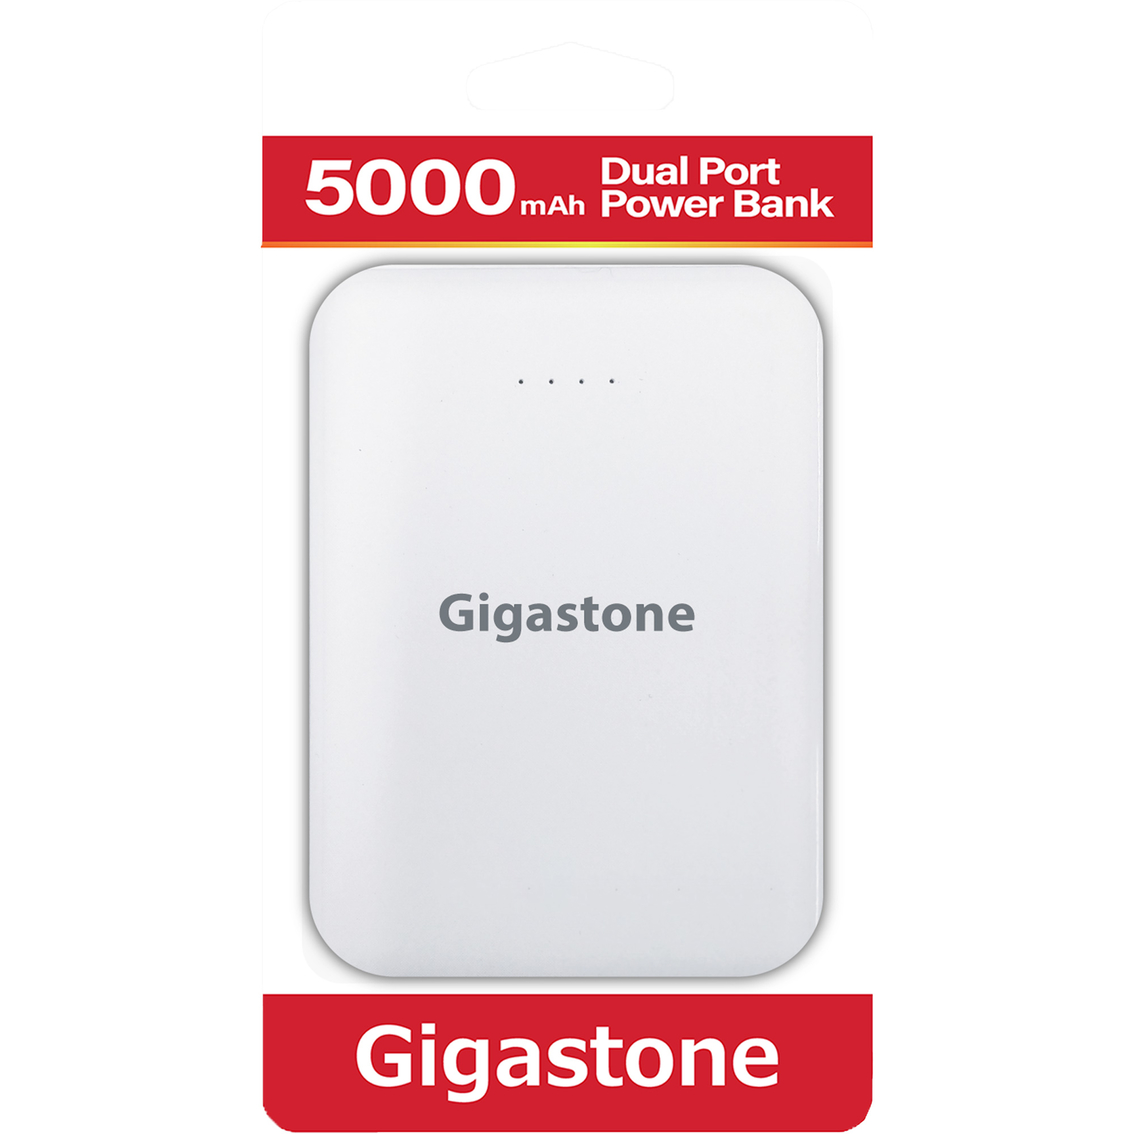 Gigastone GS-MPBP1-PC 5200mah Portable Device Charger - Image 3 of 3